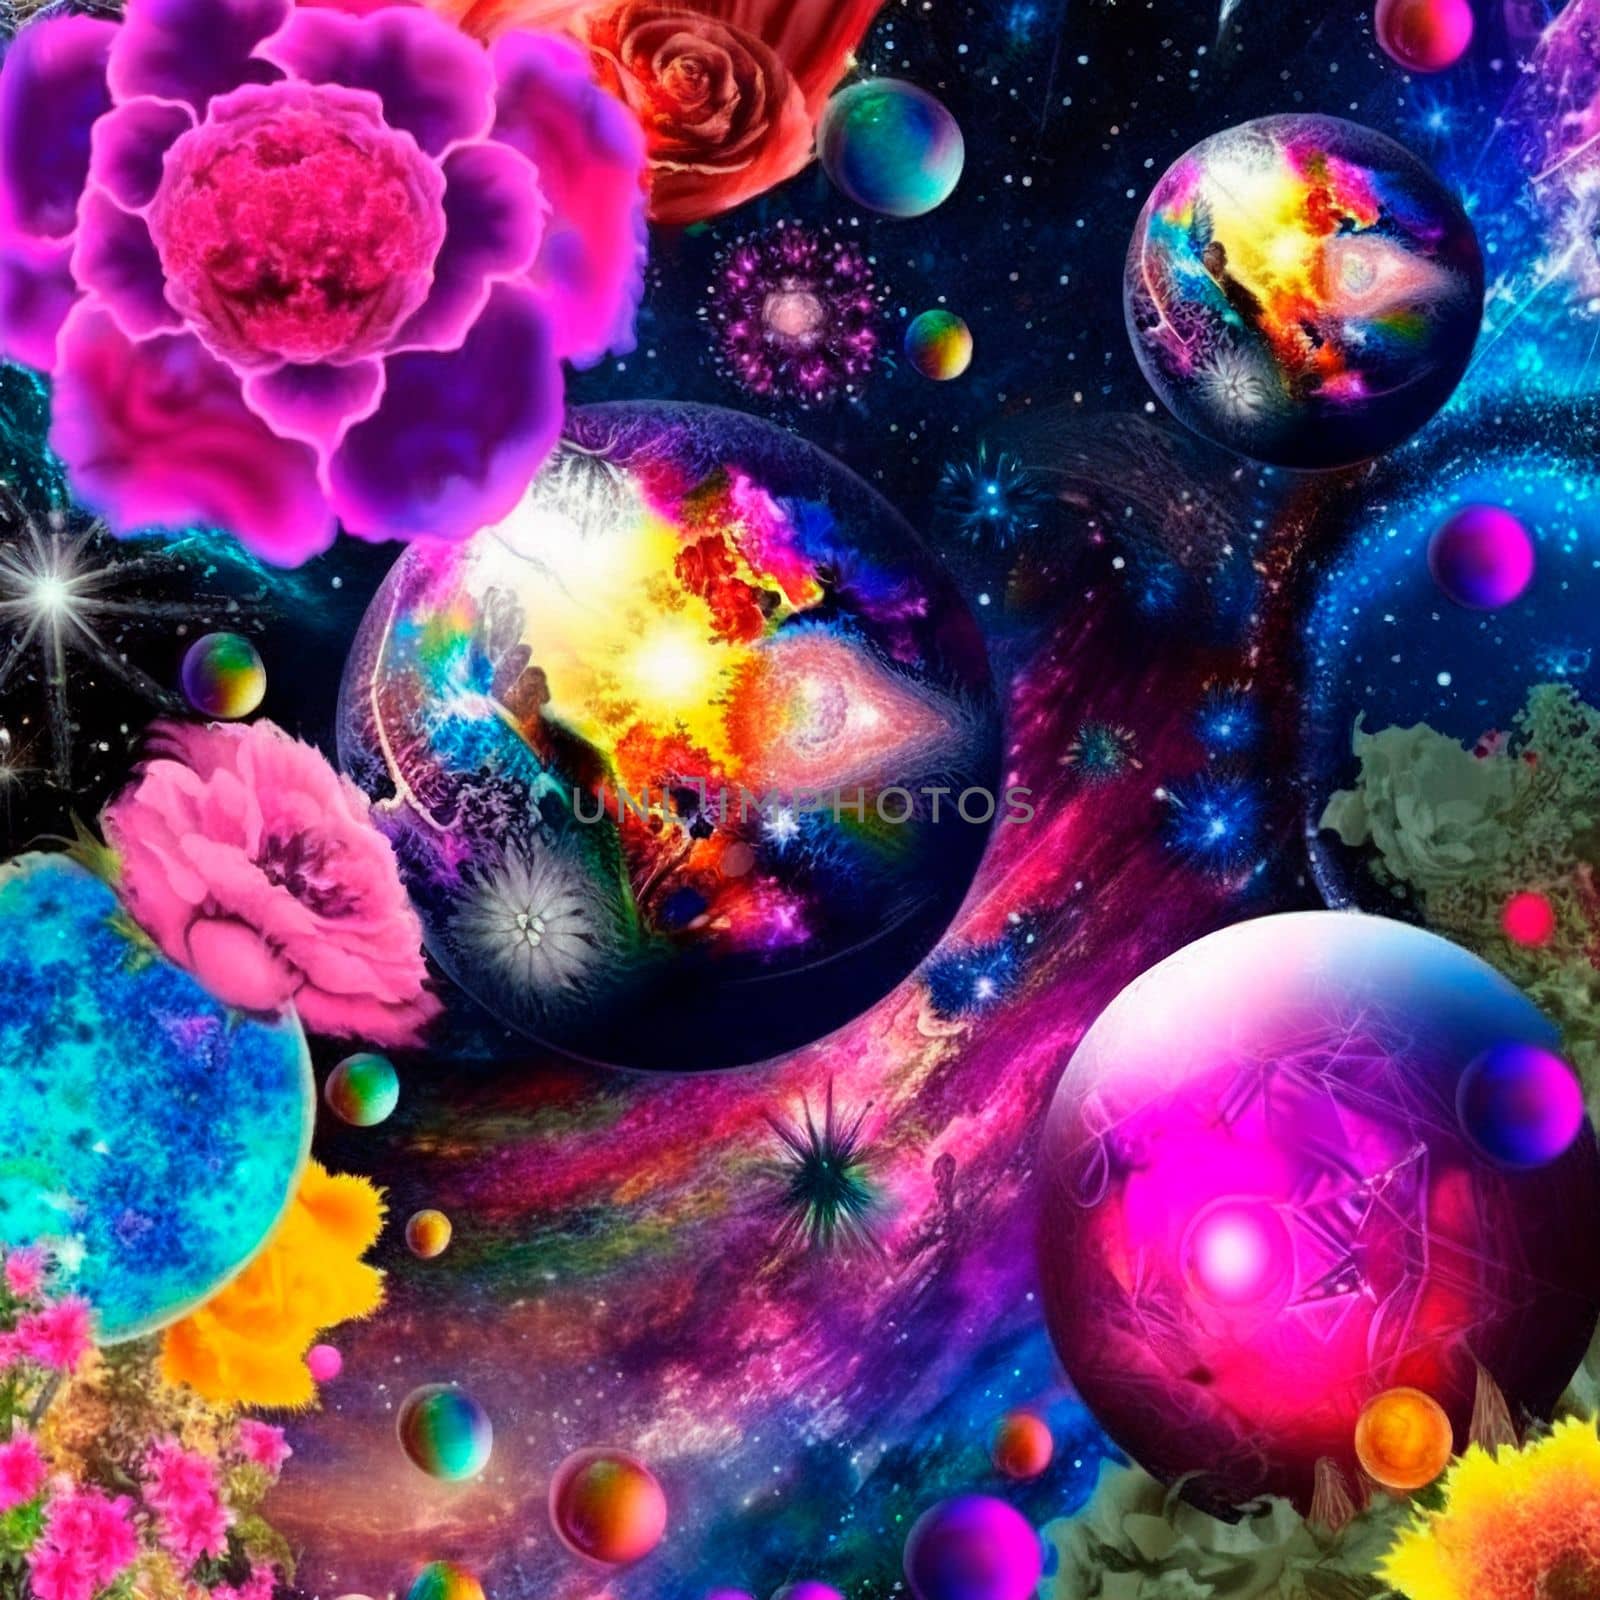 space background with different elements of rainbow colors. High quality illustration